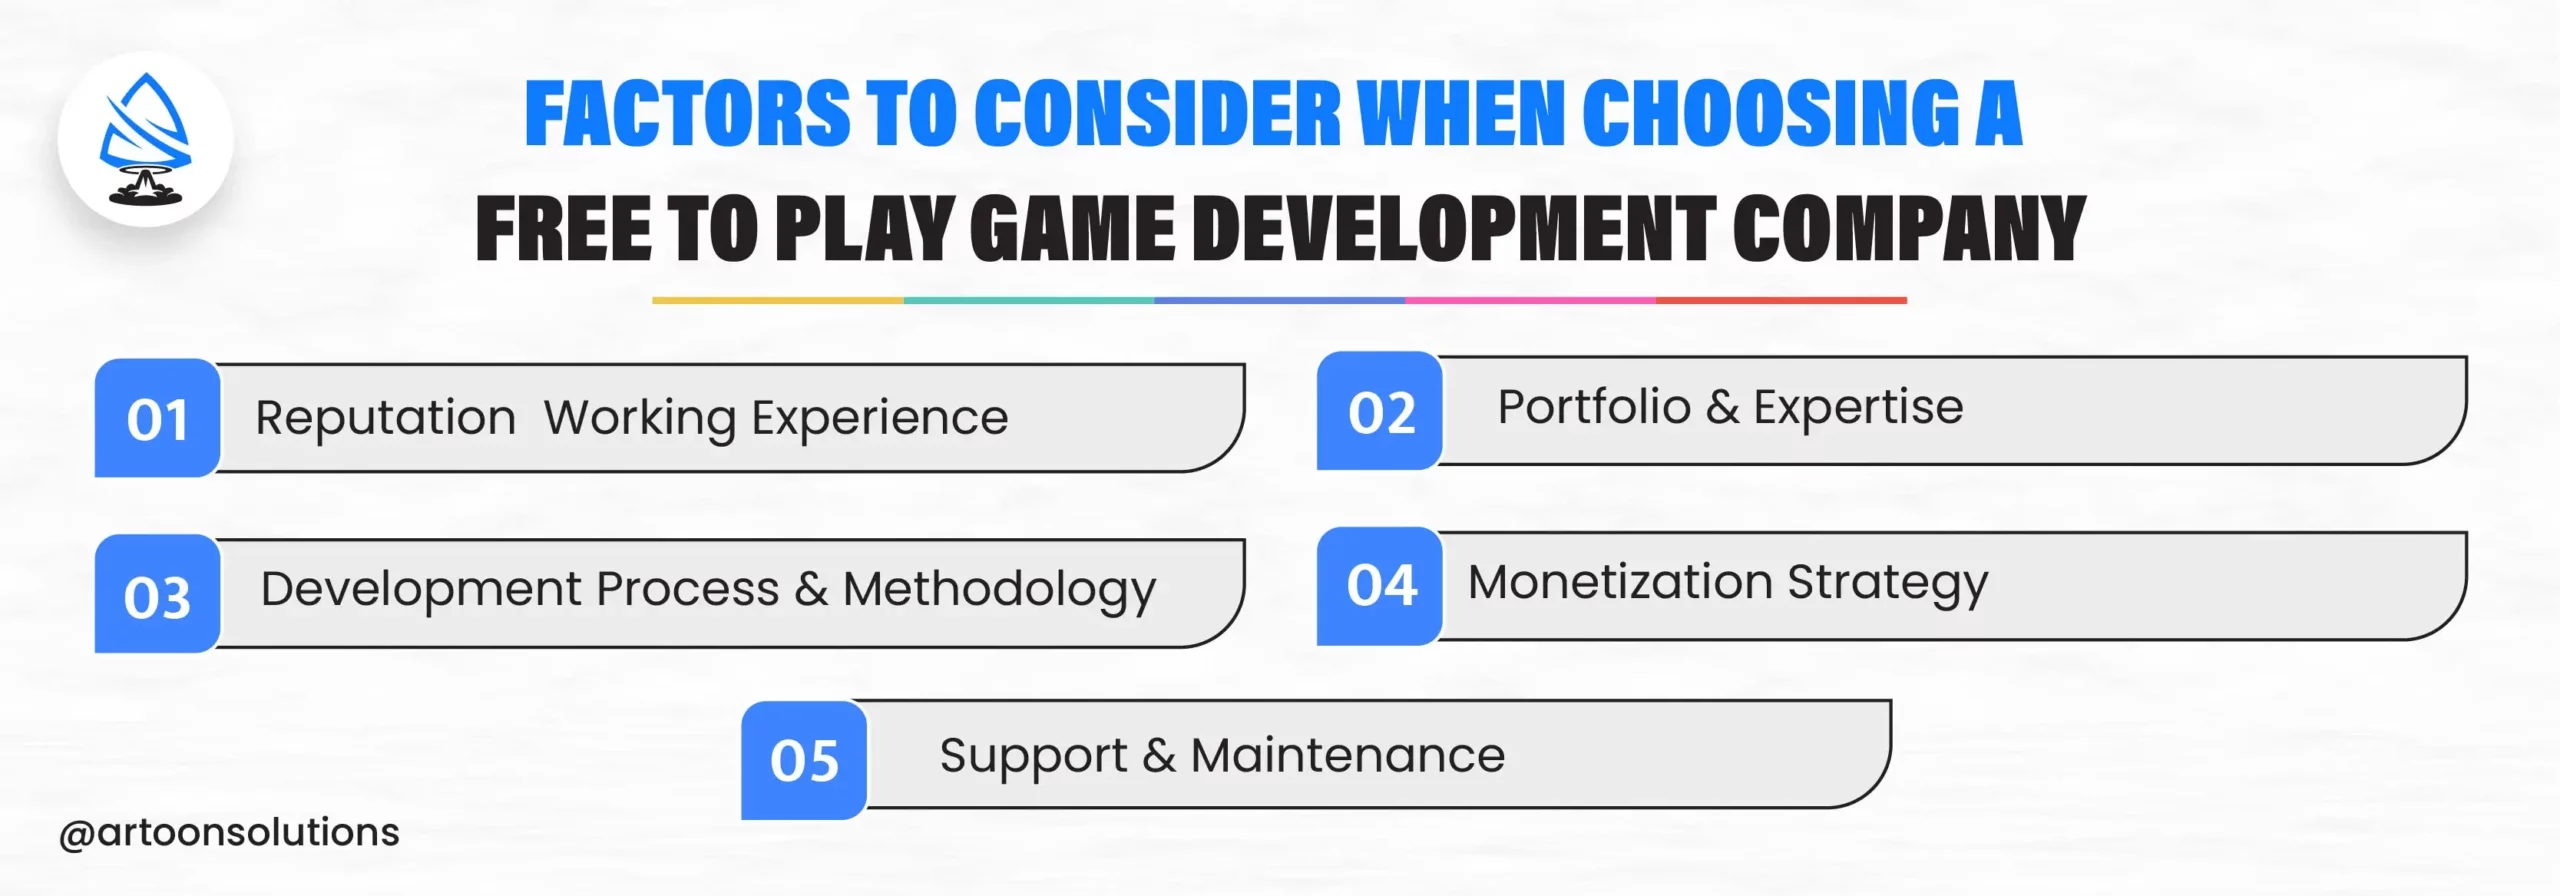 Factors to Consider When Choosing a Free to Play Game Development Company